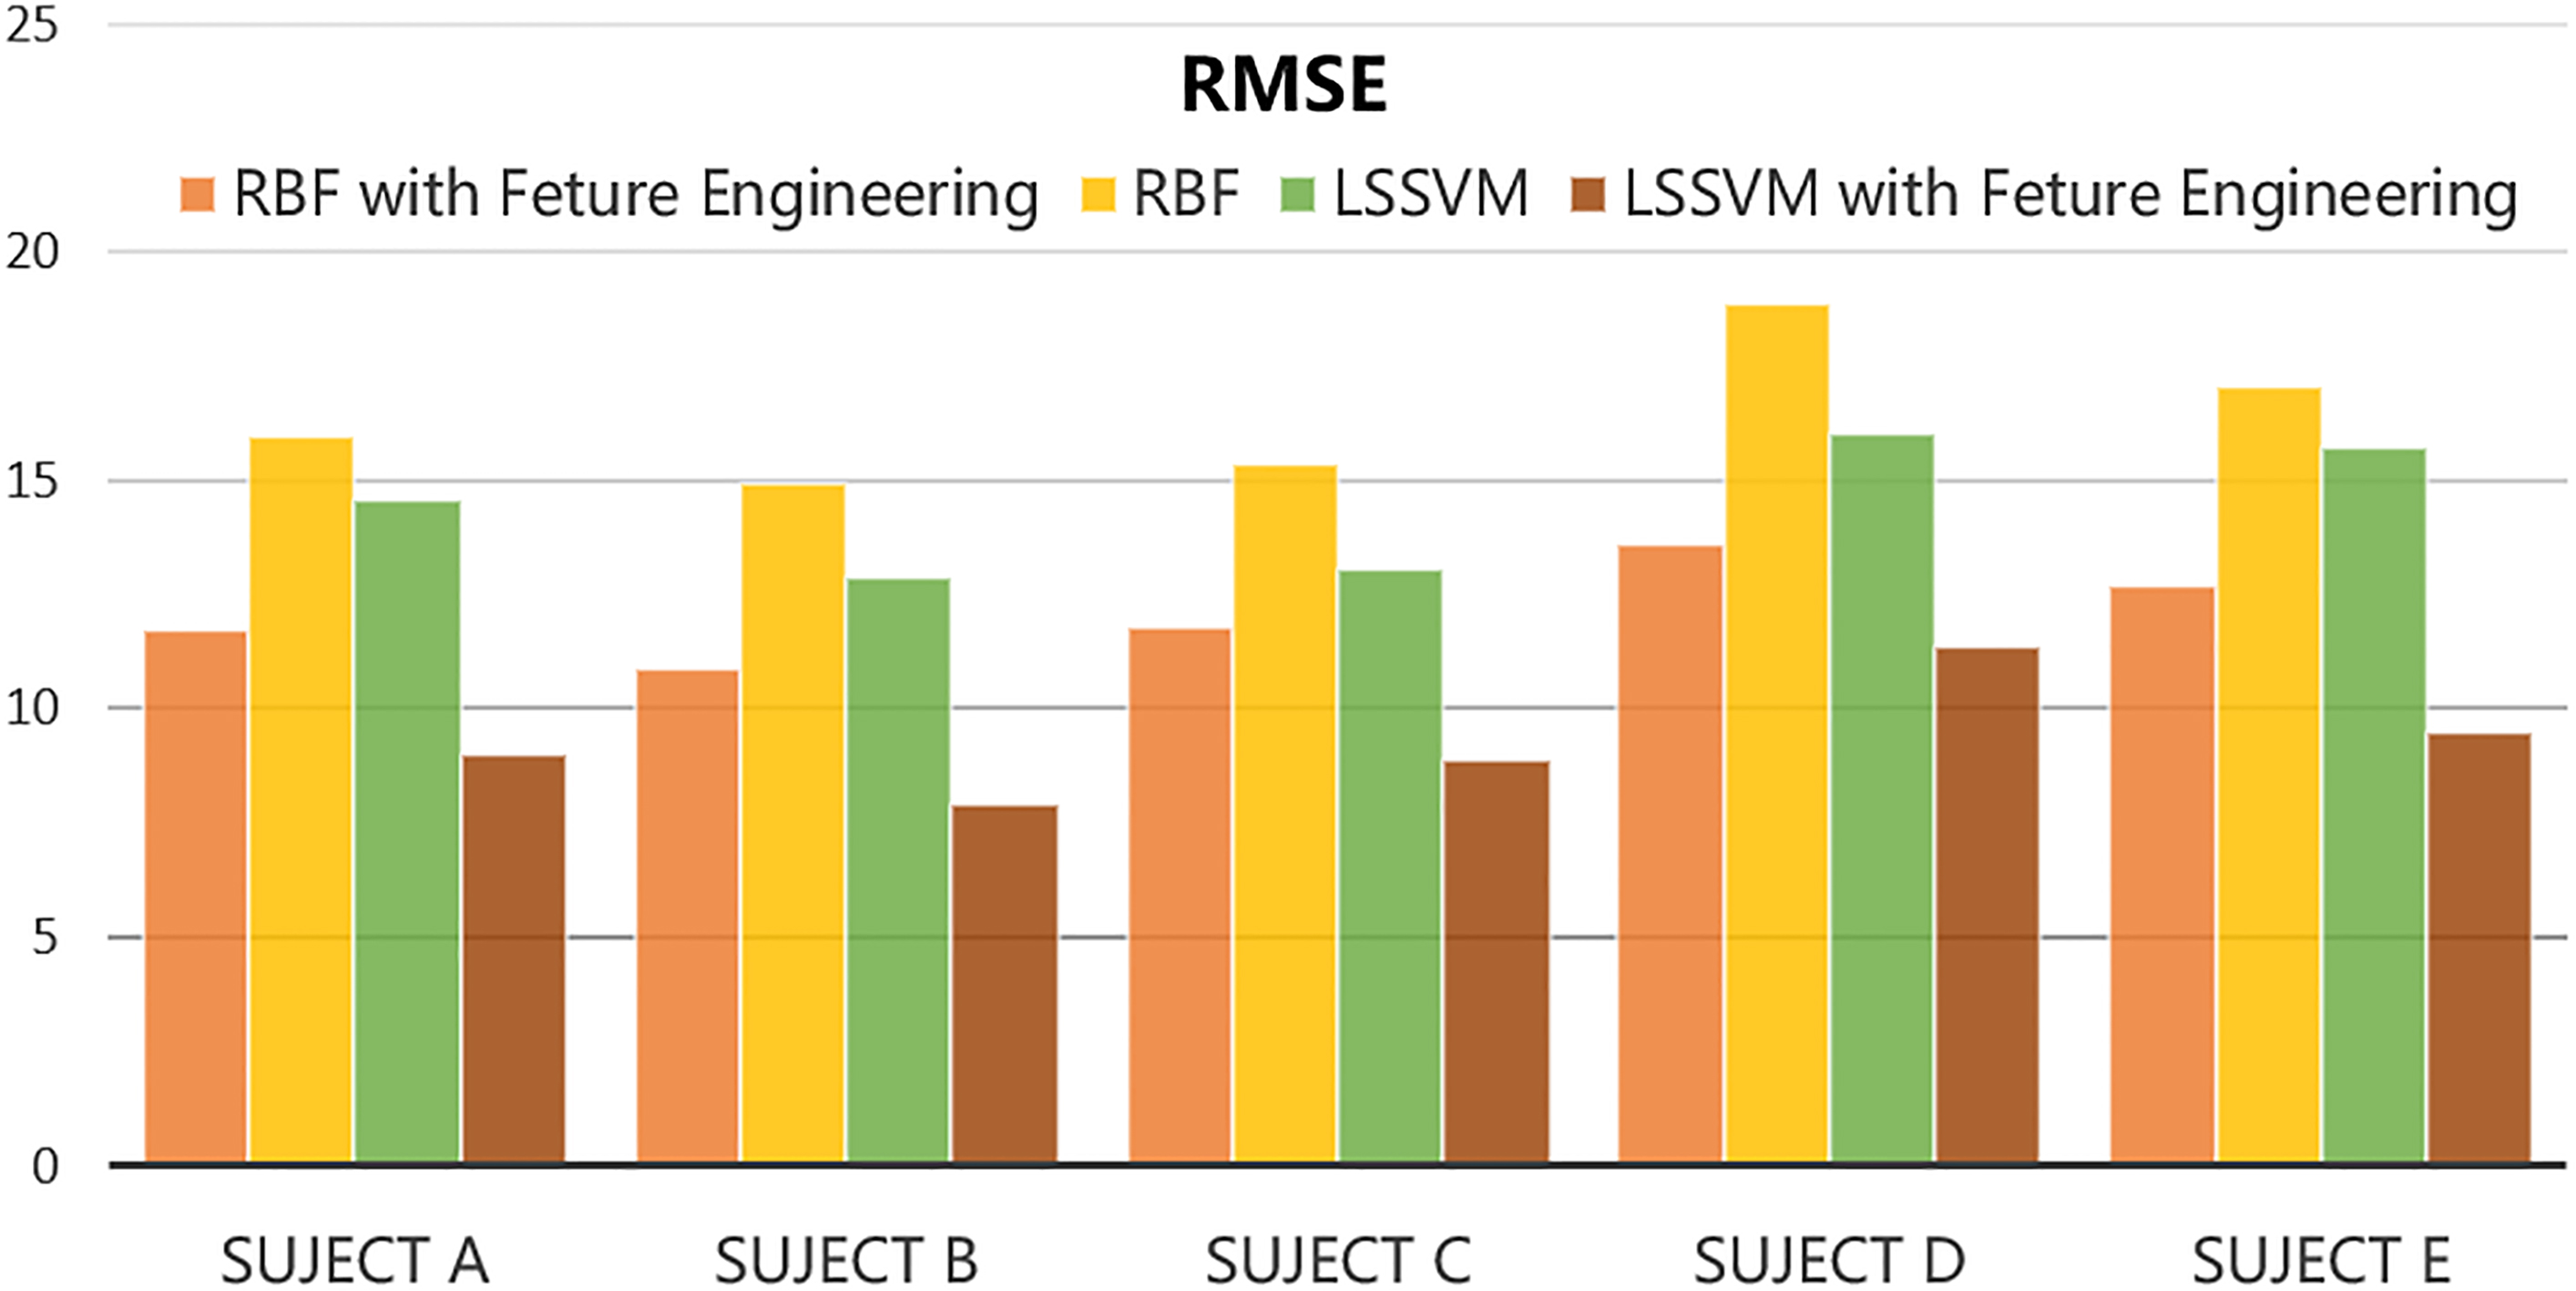 Estimated RMSE of each subject using different algorithms.